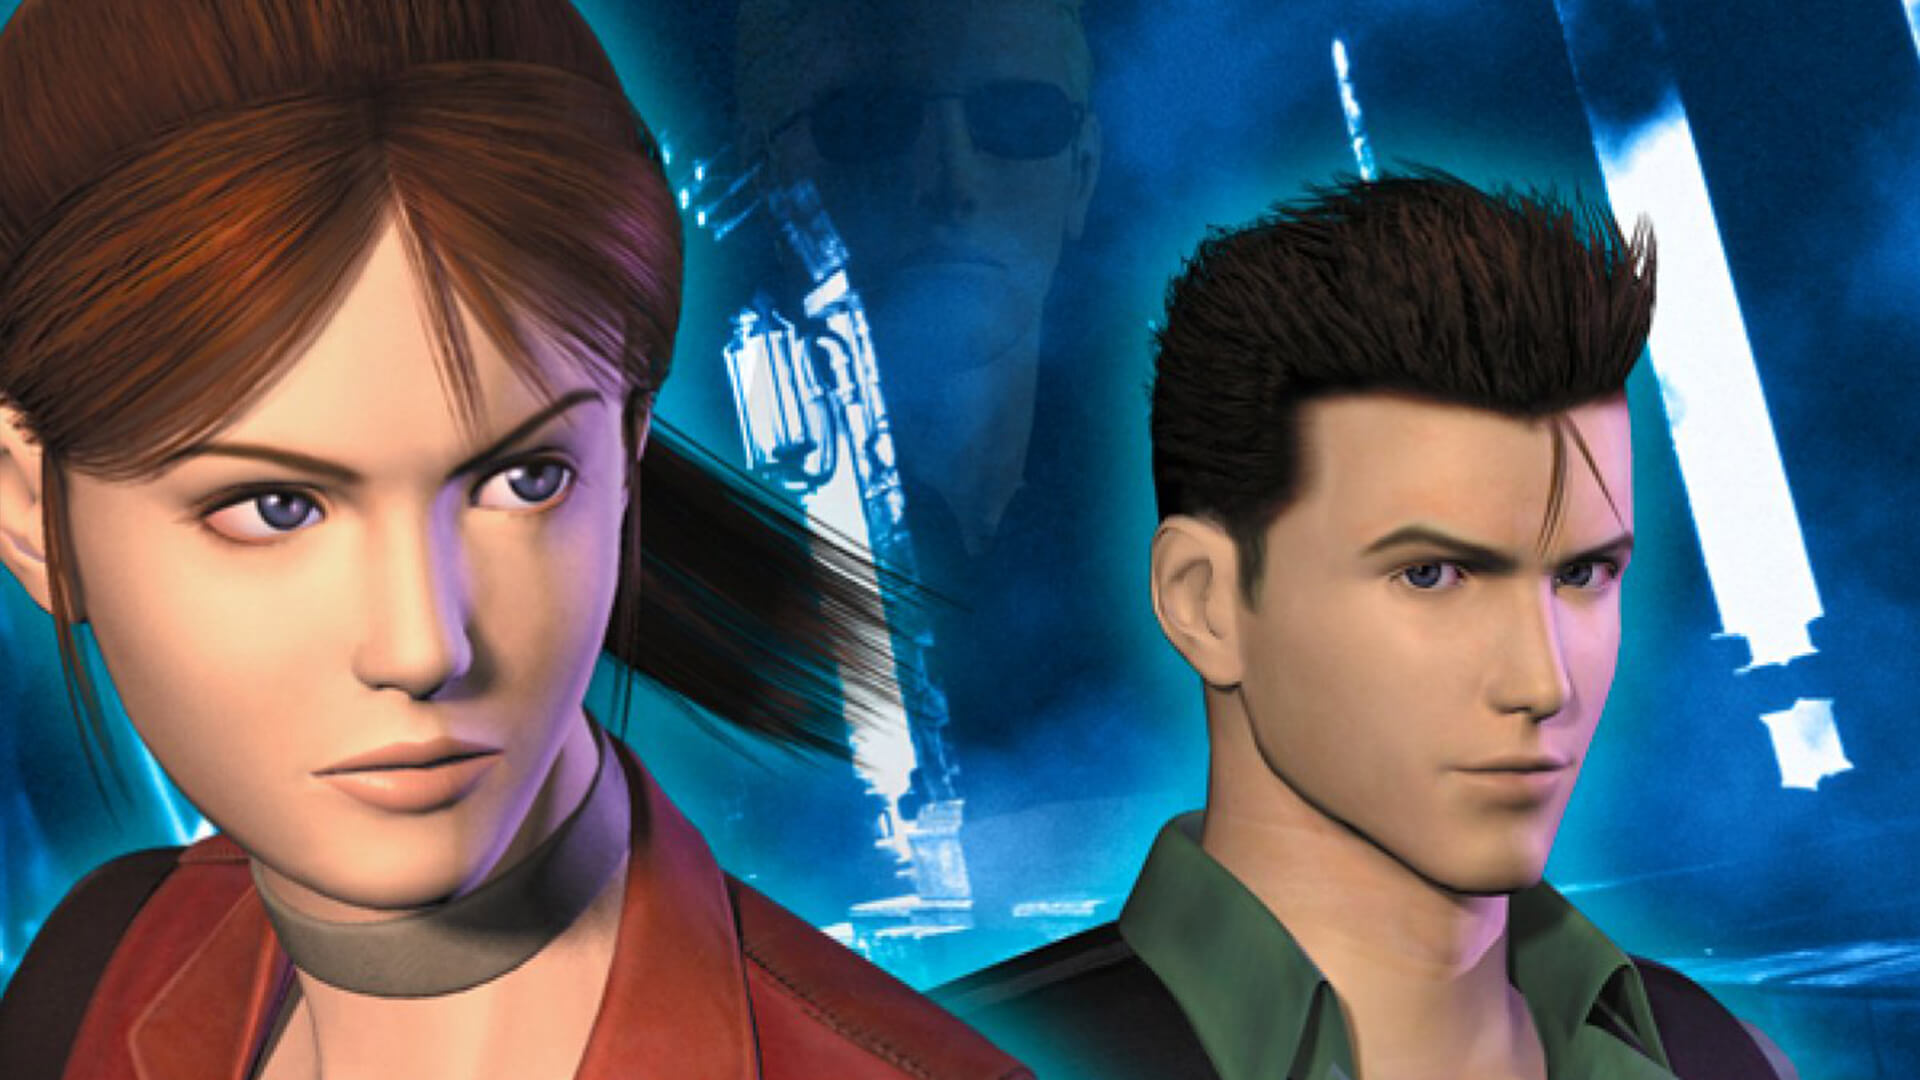 A pair of fan remakes for the original Resident Evil and Resident Evil: Code Veronica have been shut down by Capcom.